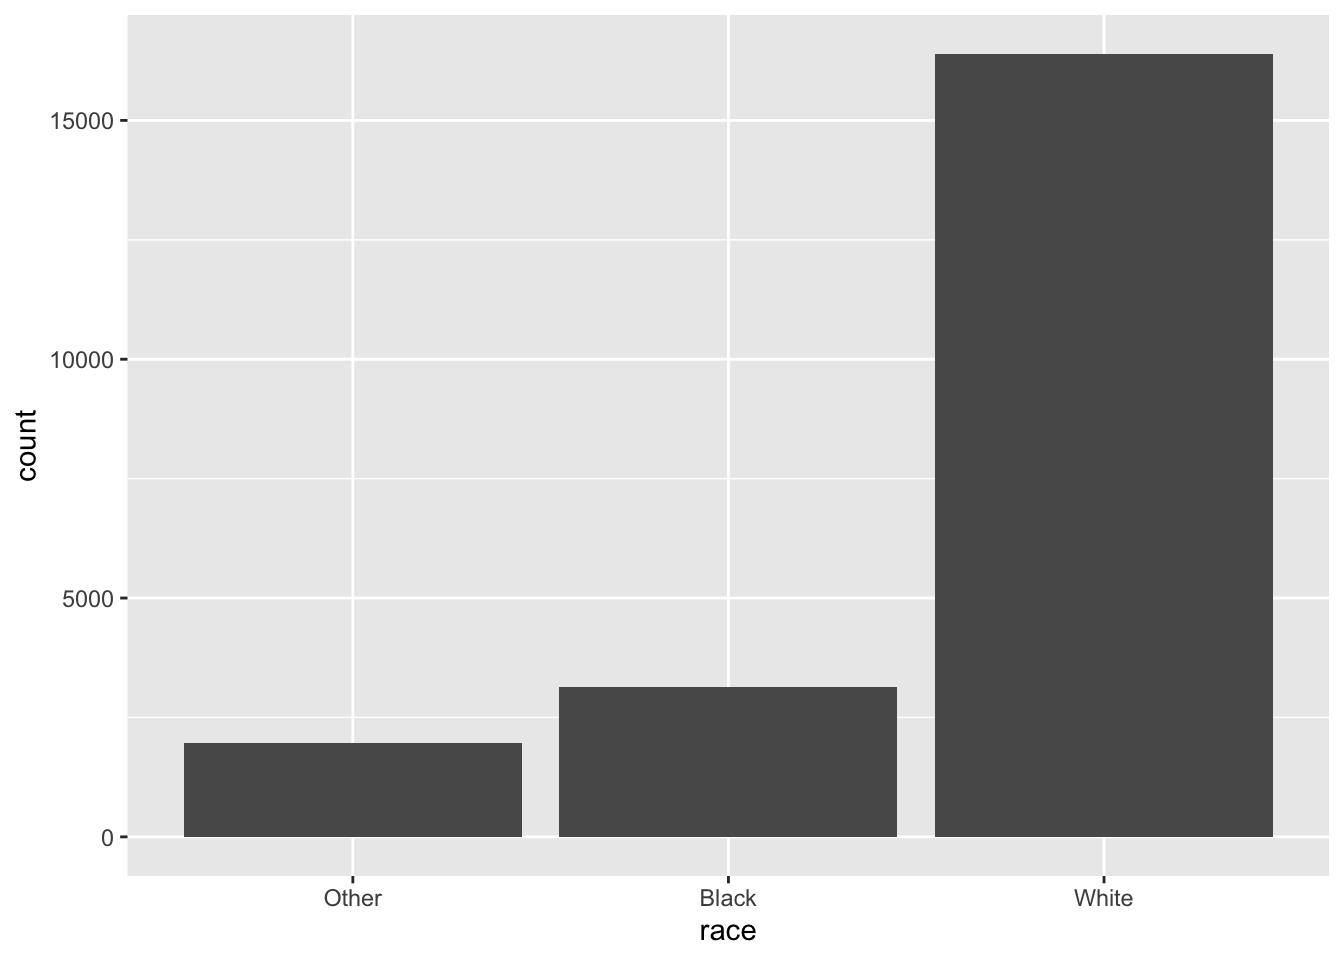 A bar chart showing the distribution of race. There are ~2000 records with race "Other", 3000 with race "Black", and other 15,000 with race "White".